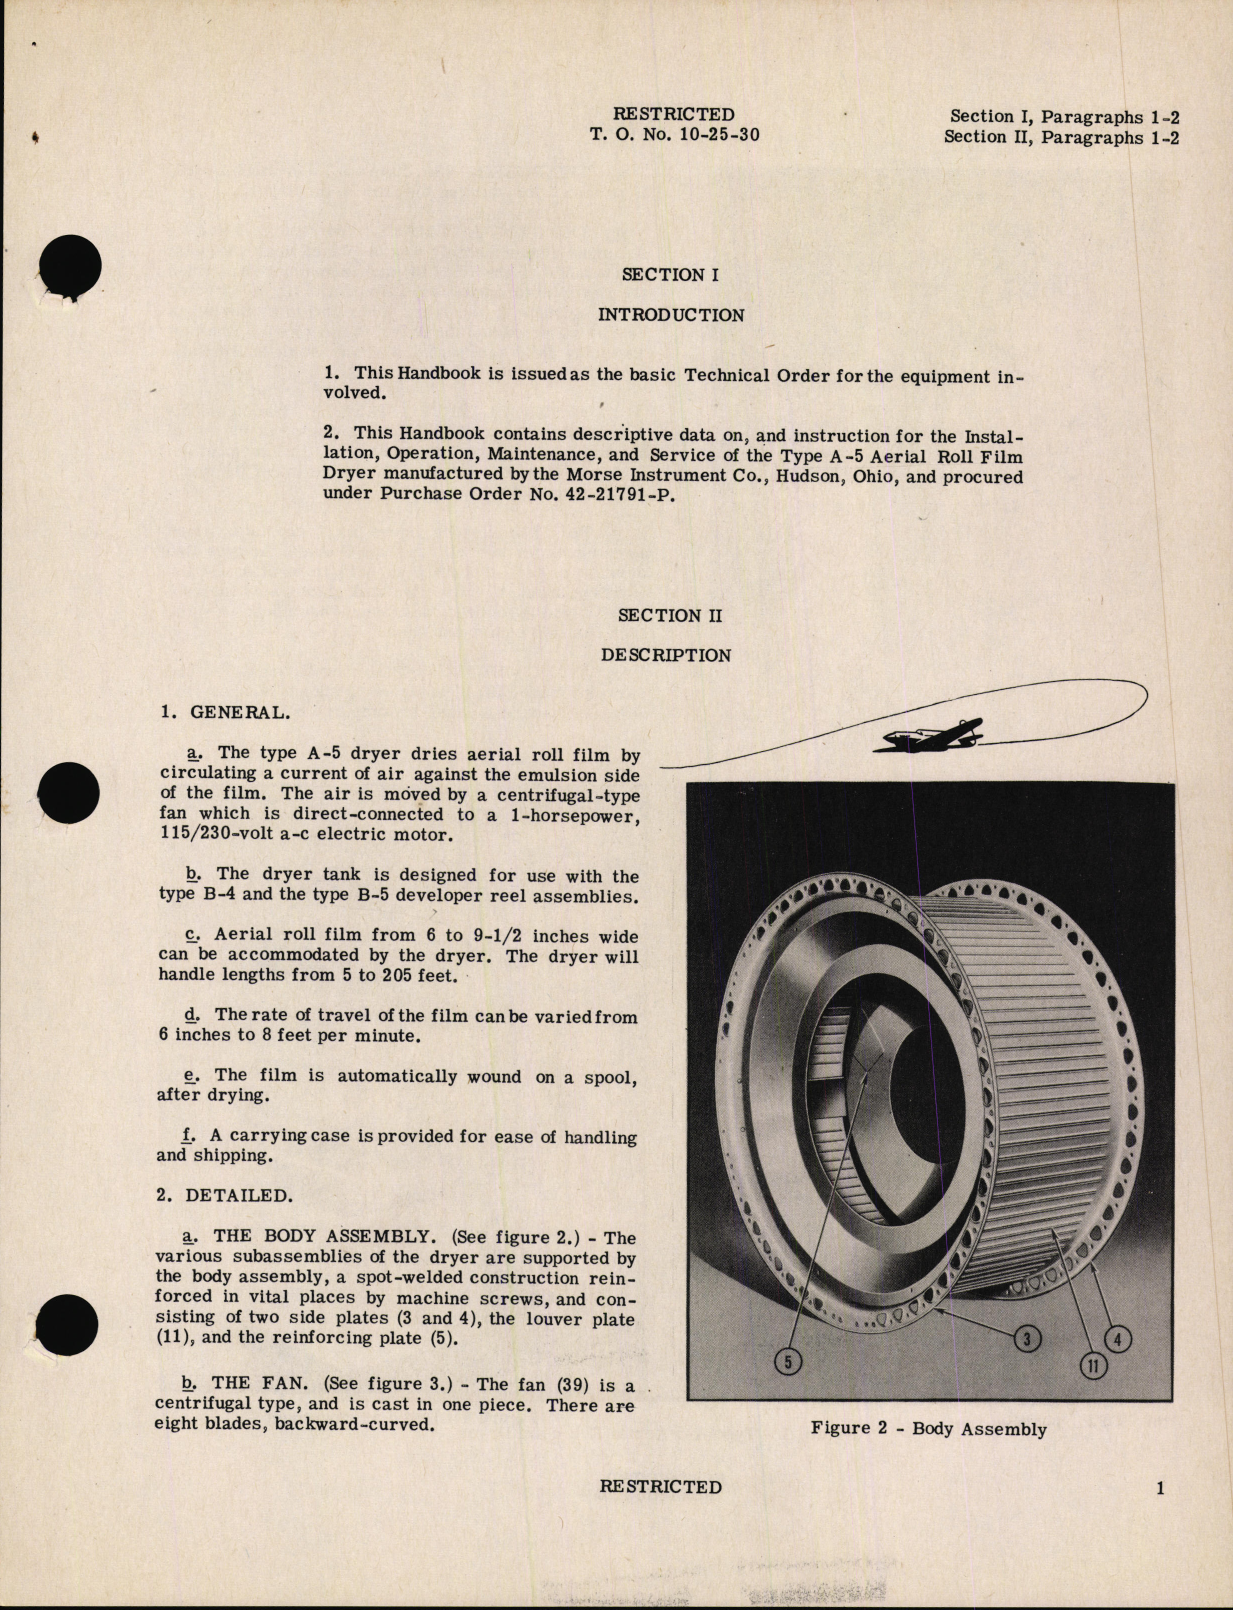 Sample page 5 from AirCorps Library document: Handbook of Instructions with Parts Catalog for Type A-5 Aerial Roll Film Dryer